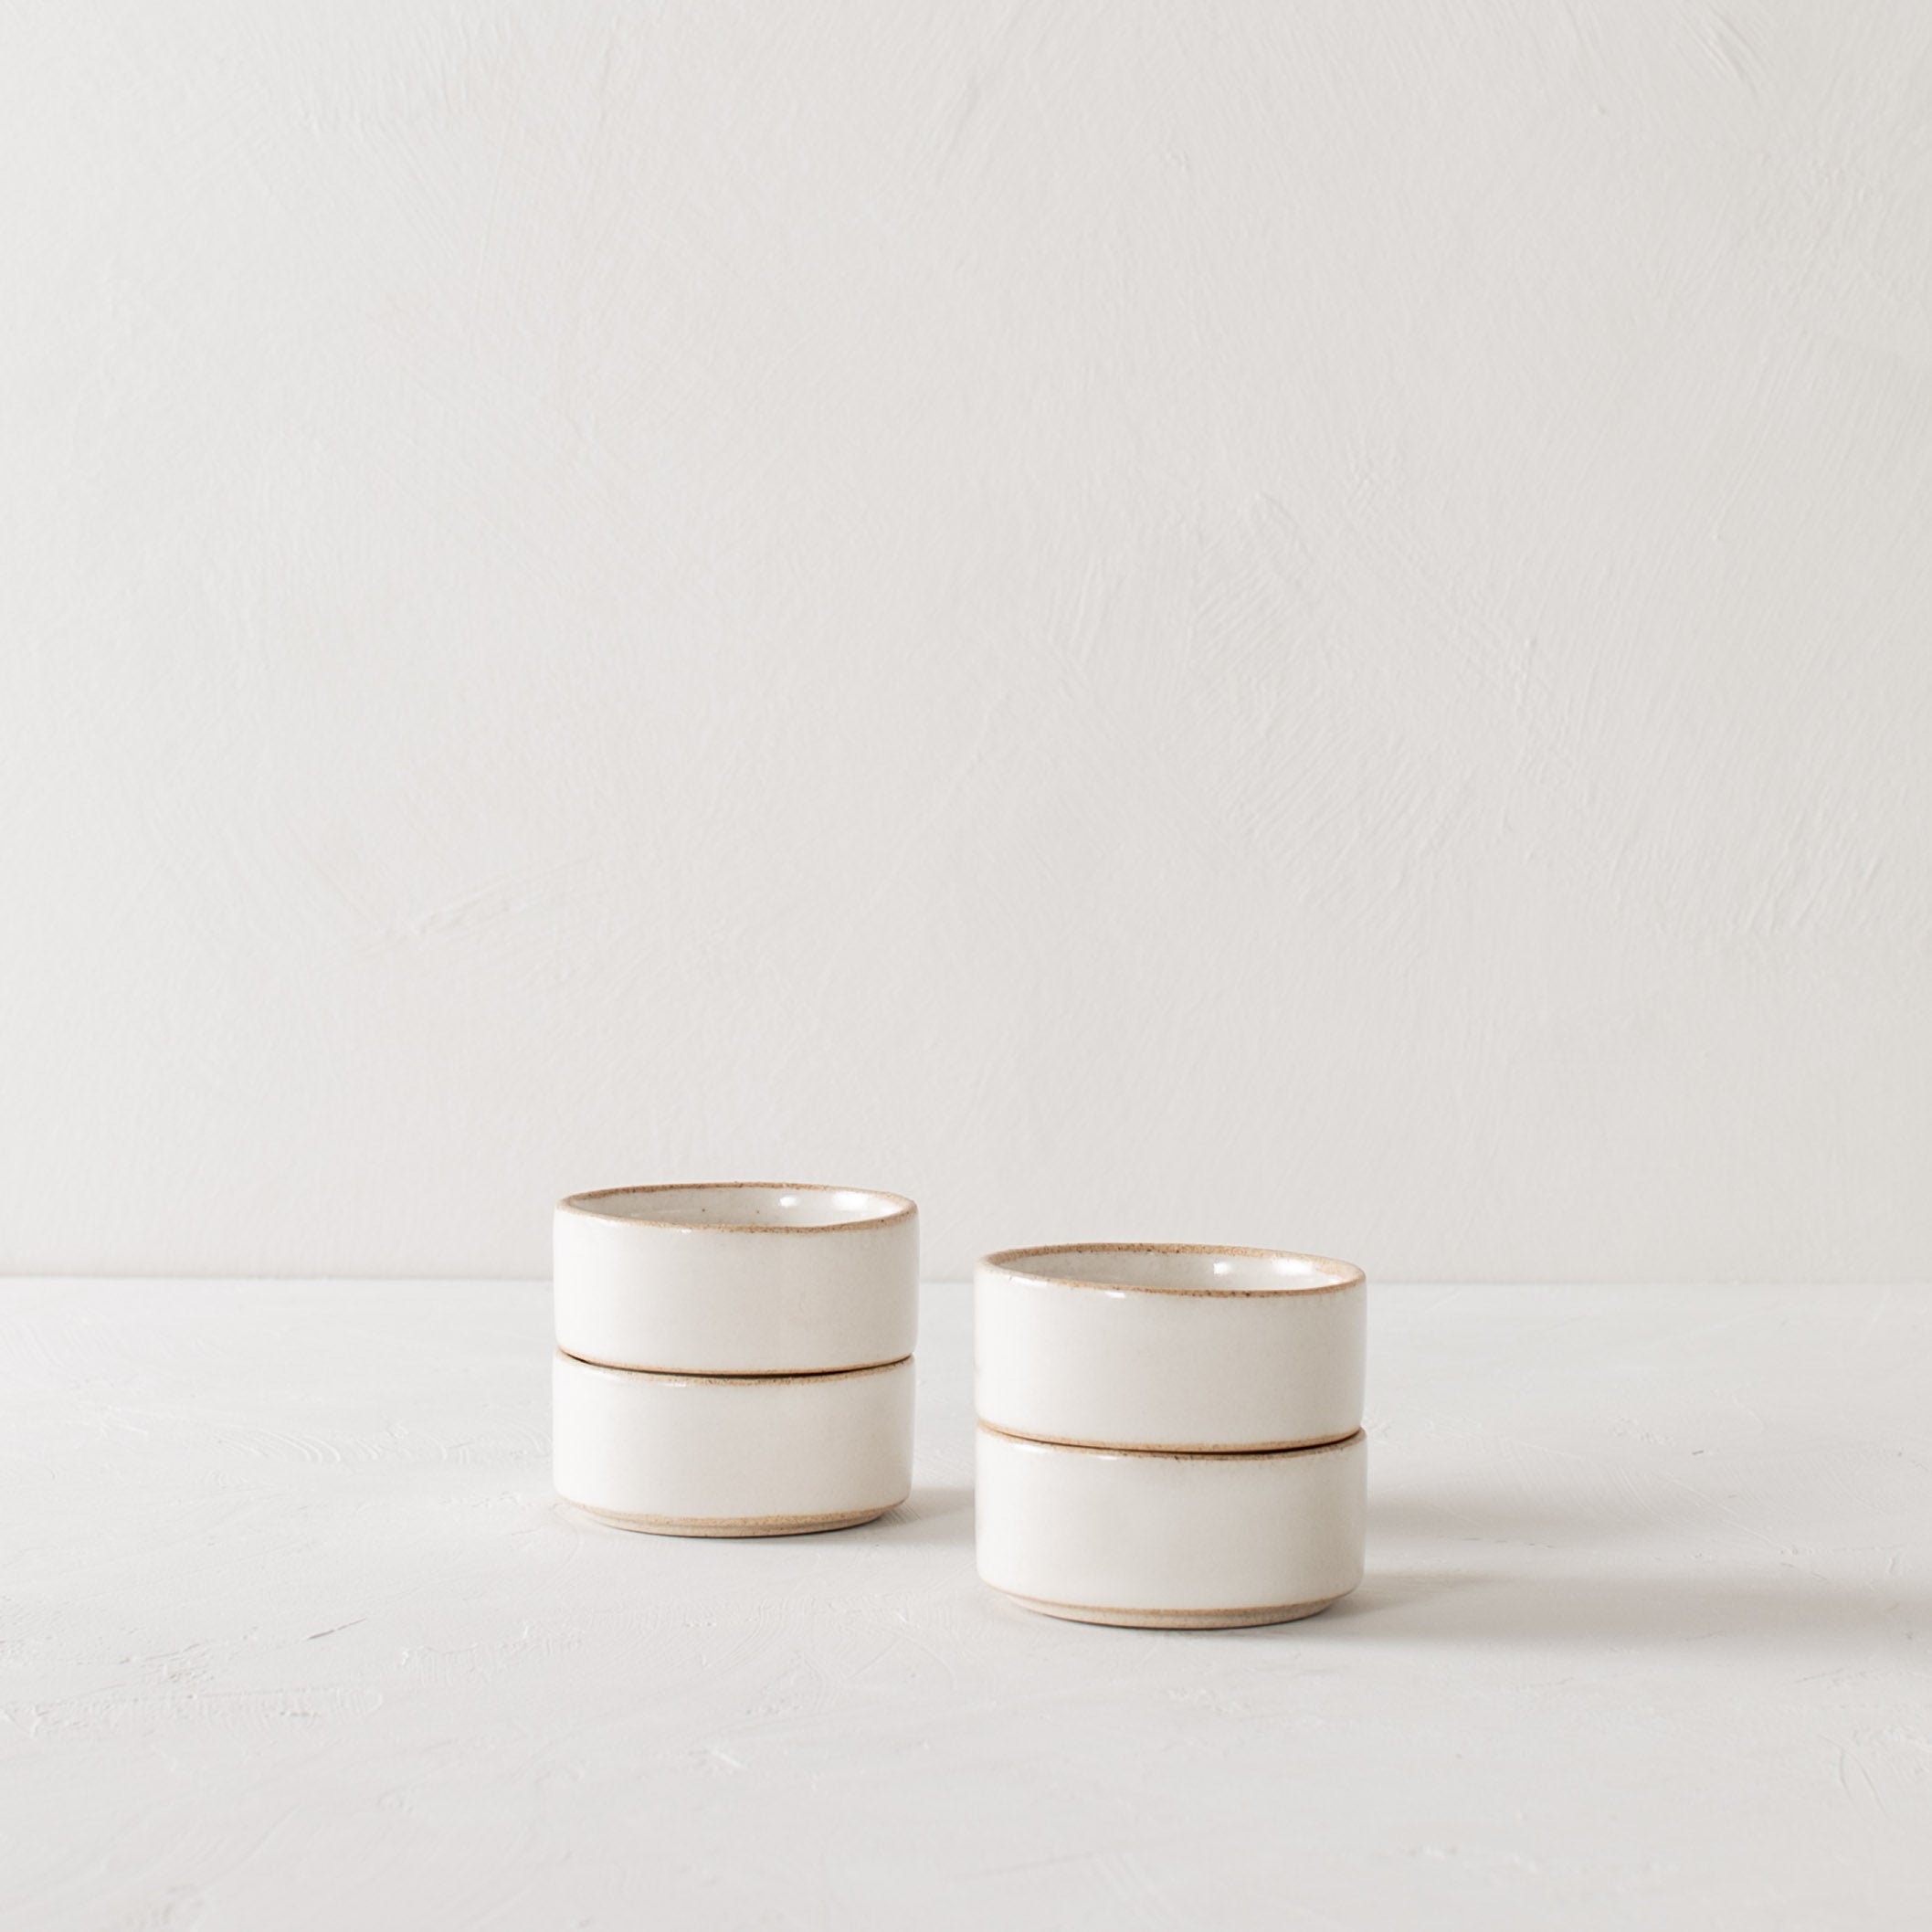 Four ramekin dishes stacked in two stacks of two. Ramekin dishes have exposed stoneware on the rim and base. Handmade ceramic ramekin, designed and sold by Convivial Production, Kansas City ceramics. 